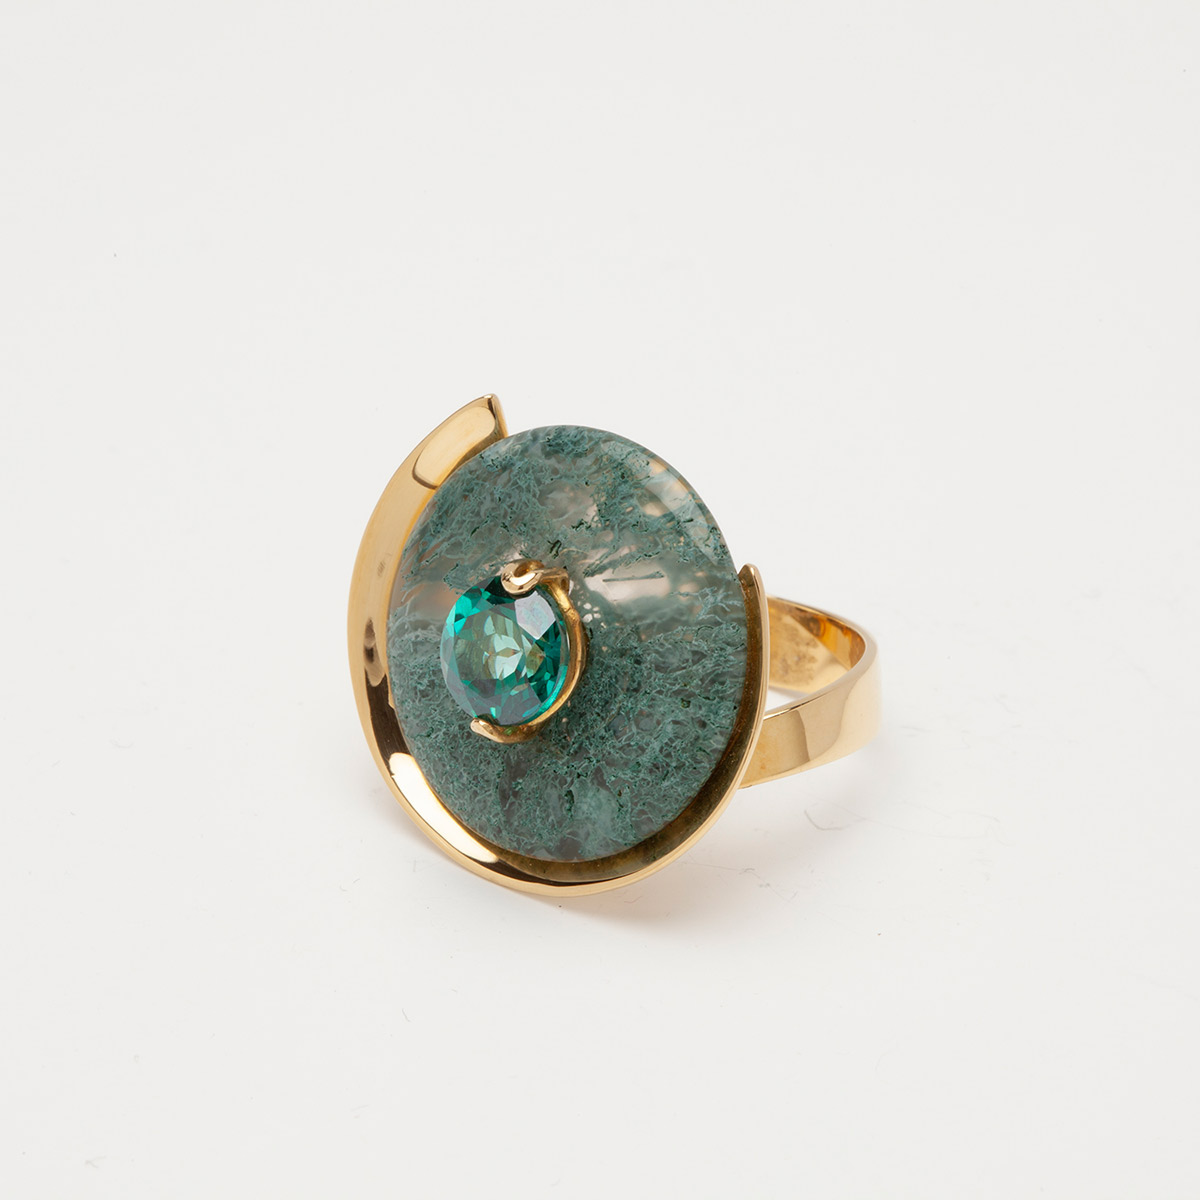 Cei handmade ring in 9k or 18k gold, moss agate and peridot 1 designed by Belen Bajo